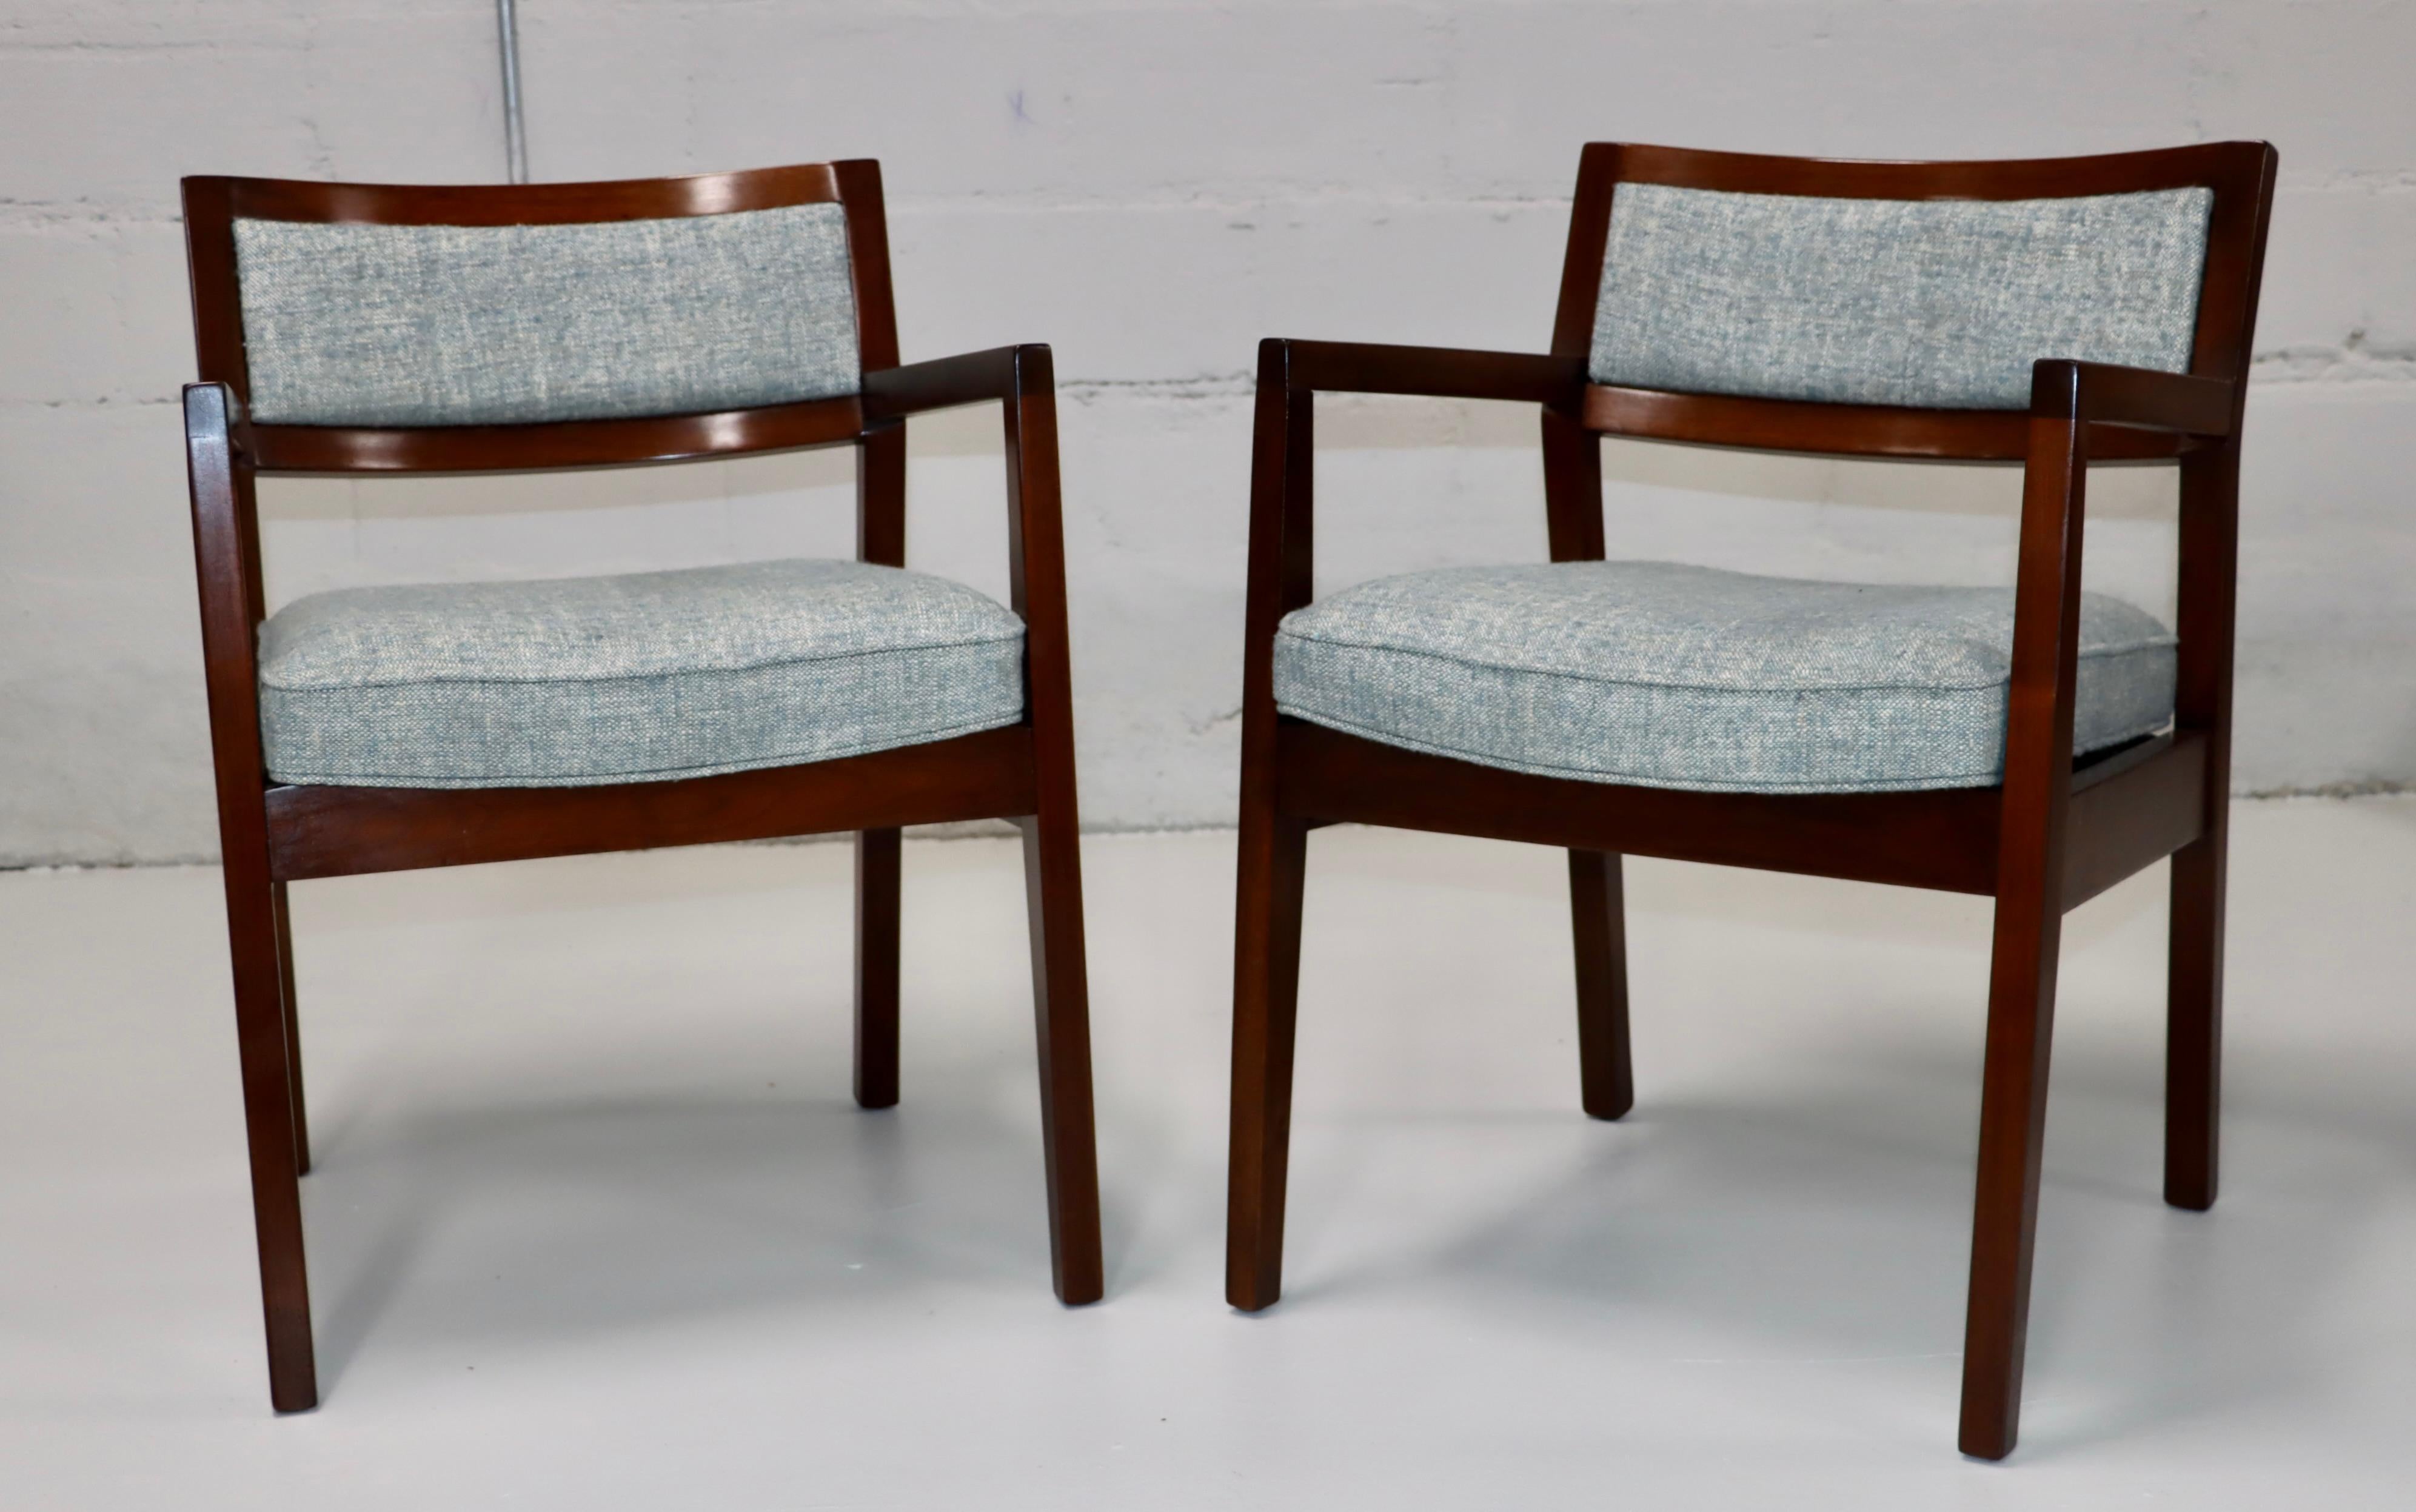 1960's mid-century modern walnut and fabric armchairs in the style of Jens Risom, fully restored and re-upholstered, with minor wear and patina due to age and use.